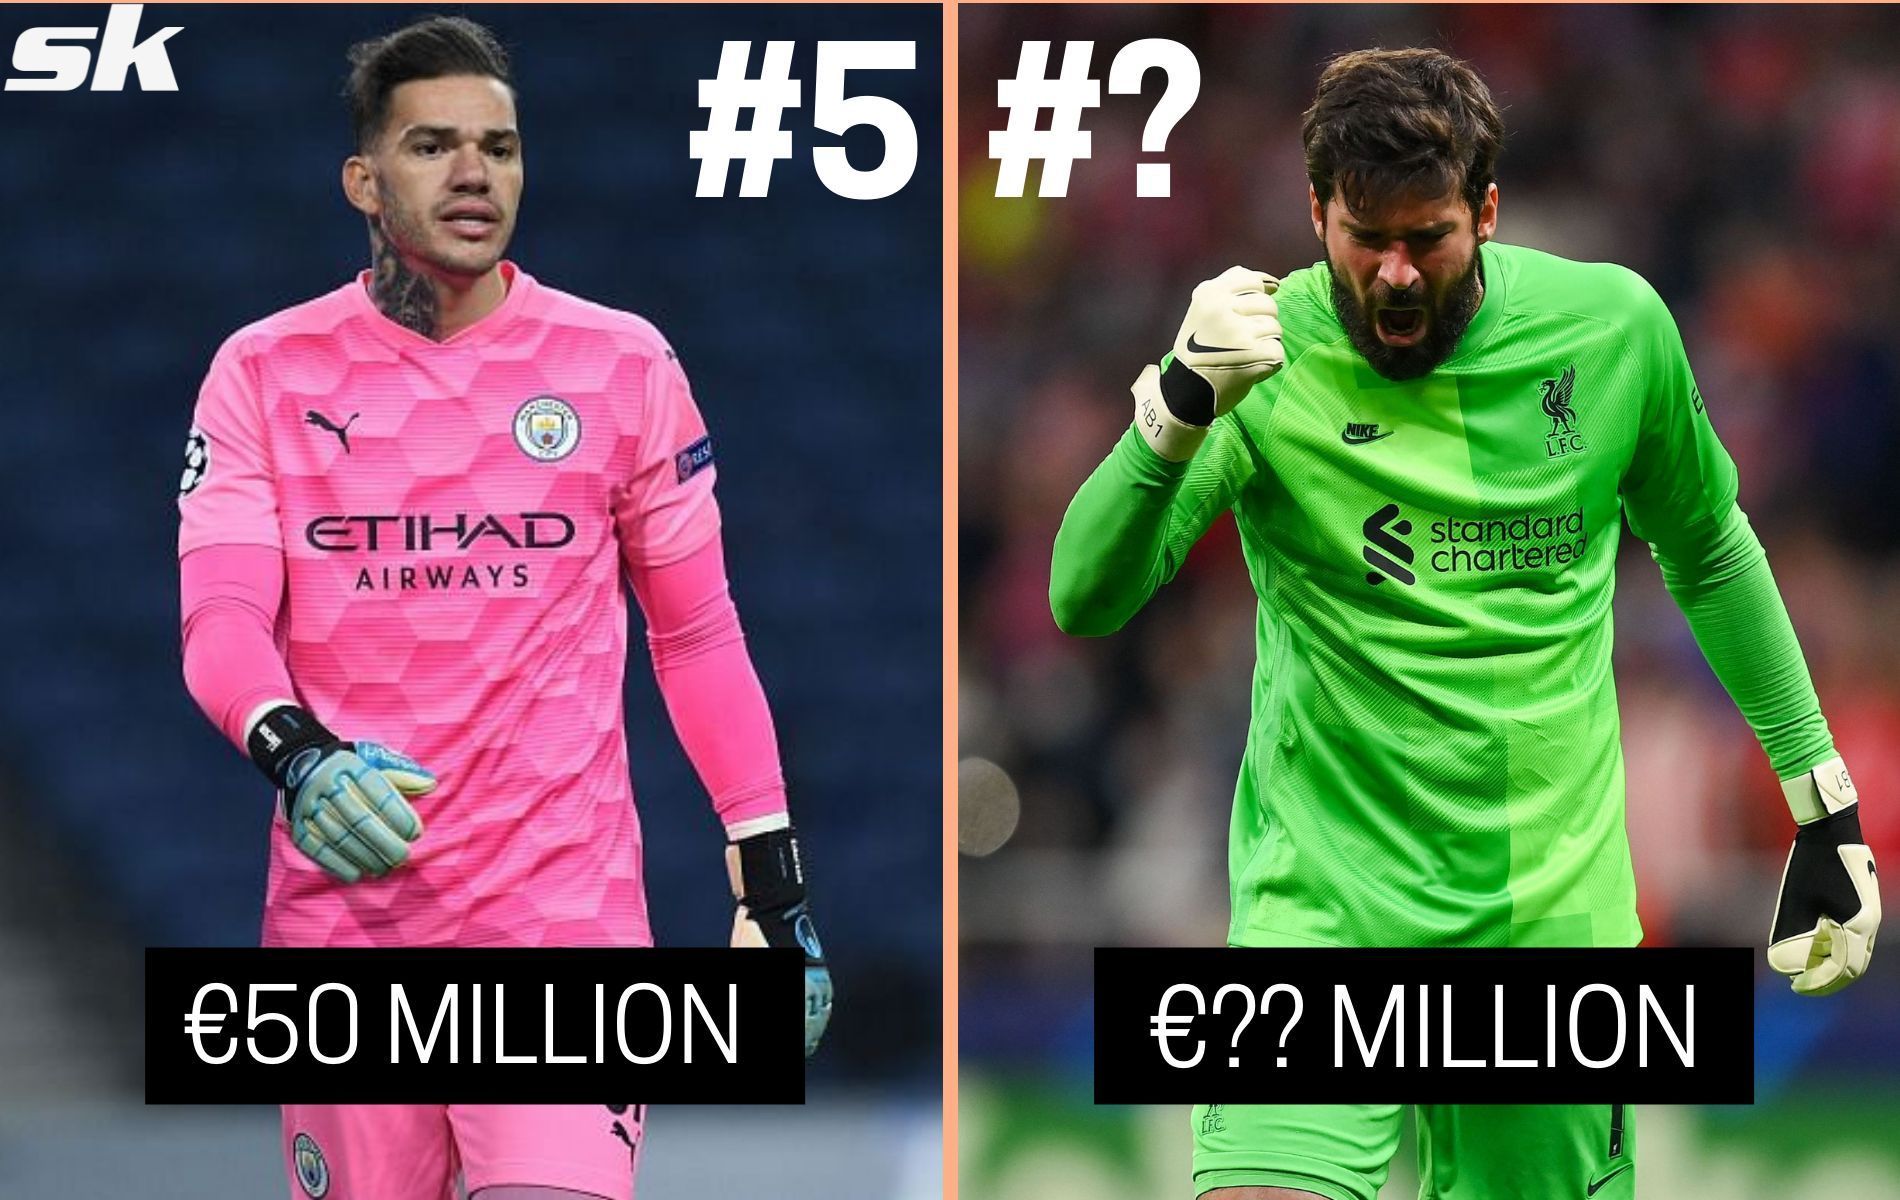 Who are the top 5 keepers according to market valuation? (Image via Sportskeeda)